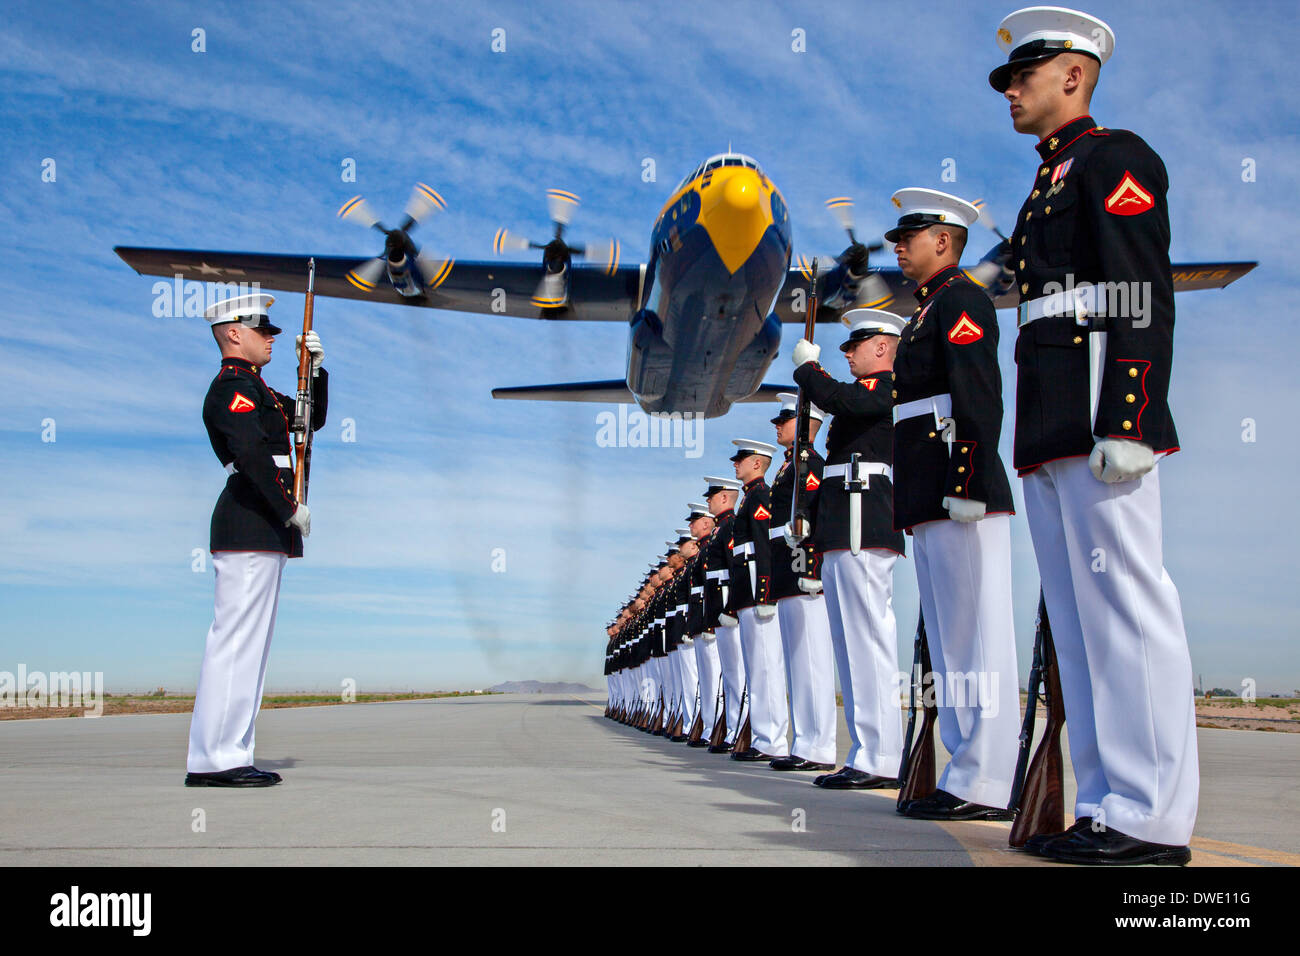 The US Marine Corps Blue Angels C-130 Hercules aircraft, affectionately known as Fat Albert, flies over the Silent Drill Platoon during air show rehearsal March 4, 2014 at Marine Corps Air Station Yuma, Arizona. Stock Photo